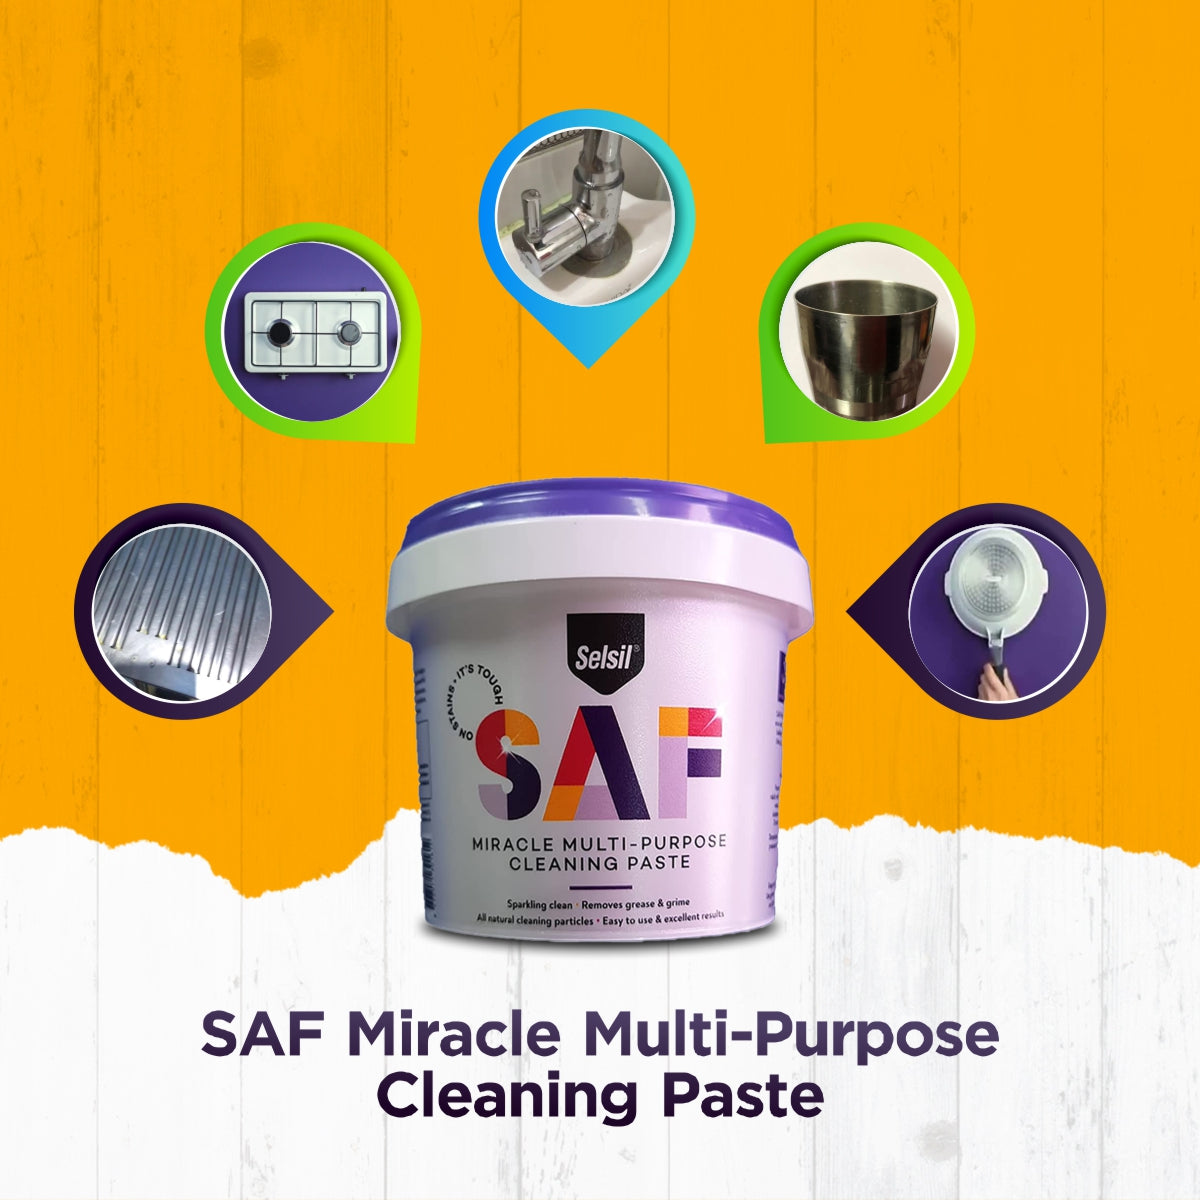 SAF Miracle Multi-Purpose Grease Cleaner